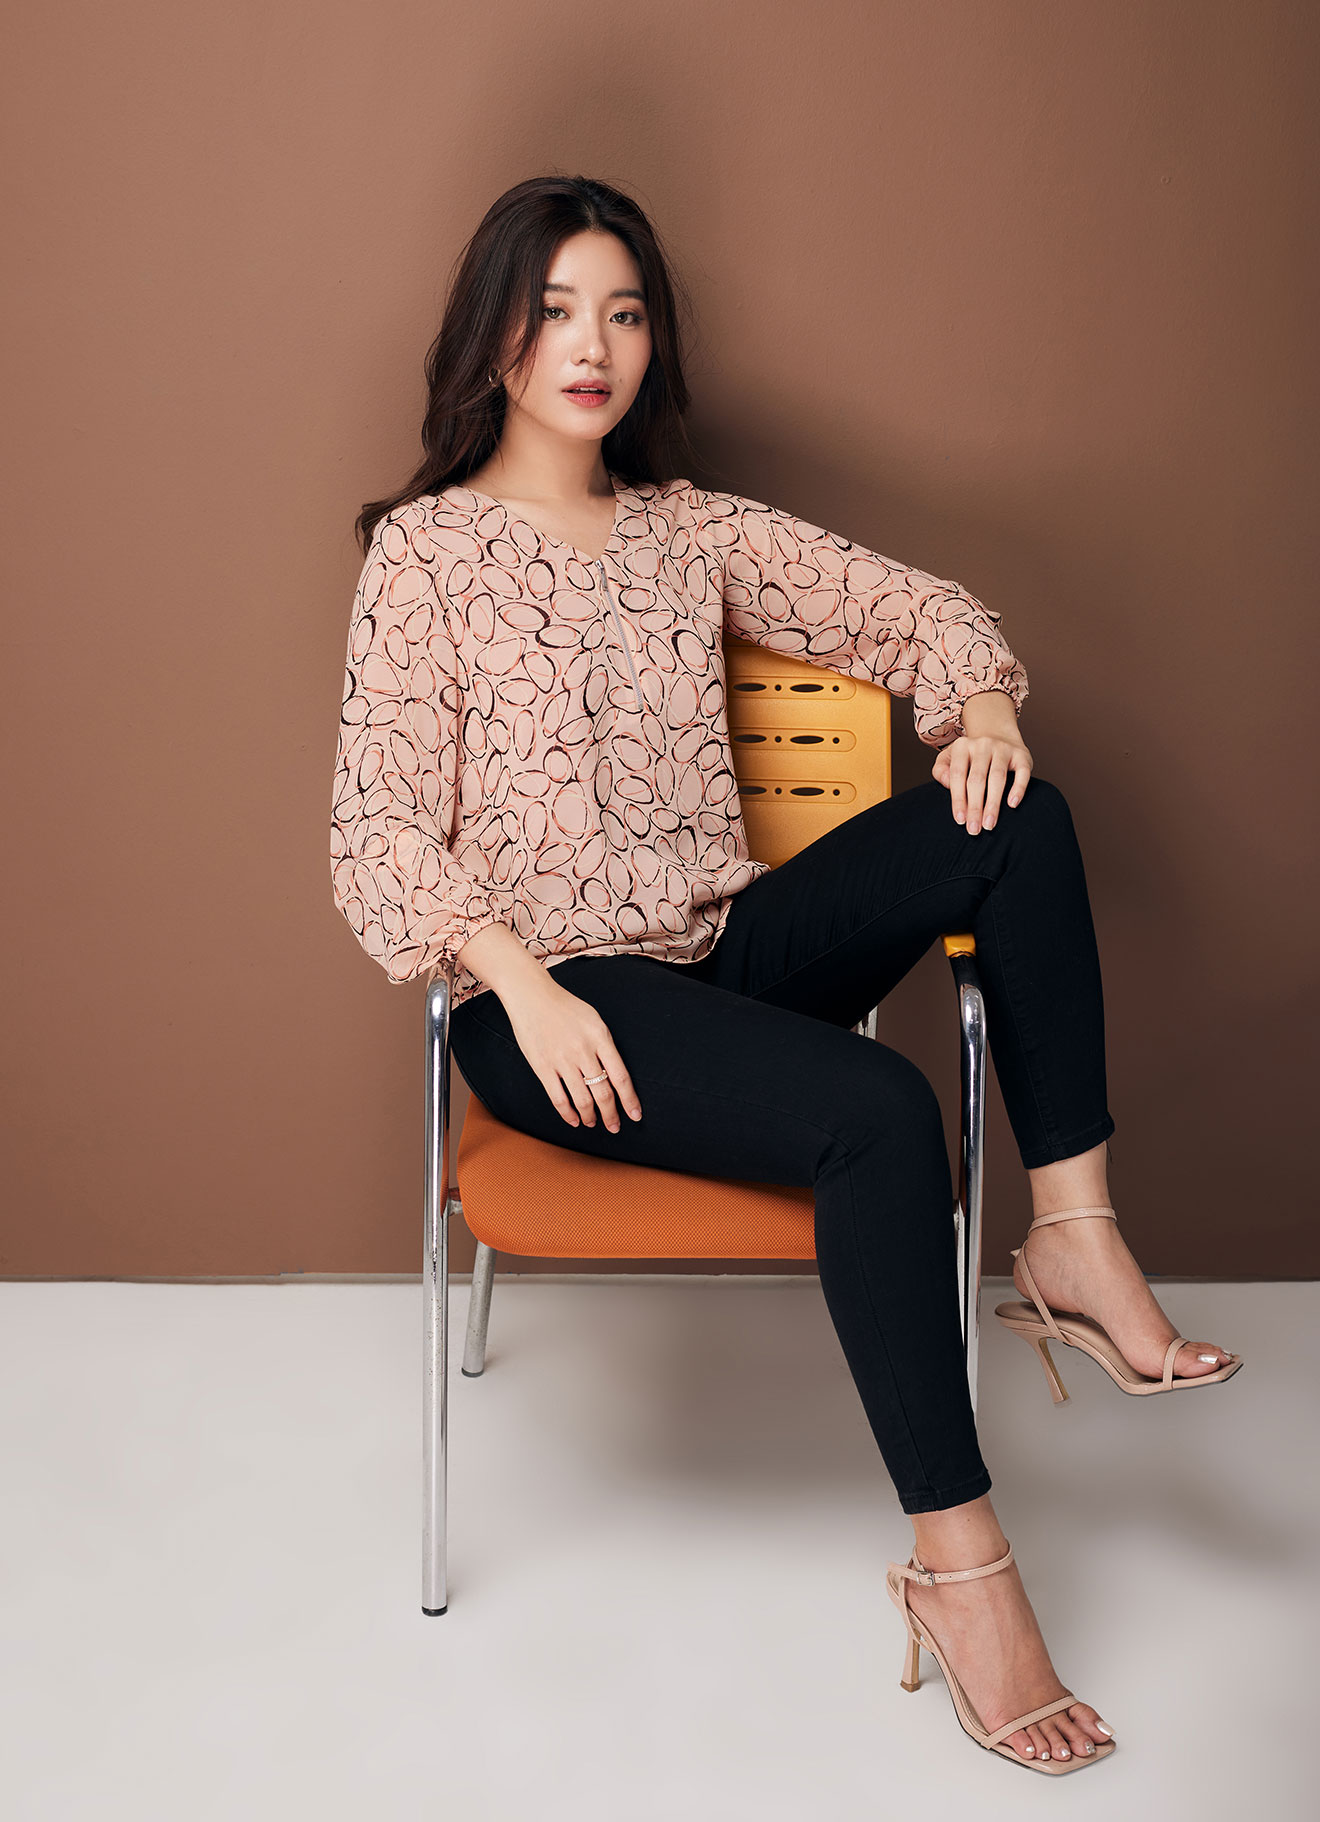 Pale-Peach  by Long Sleeve Blouse